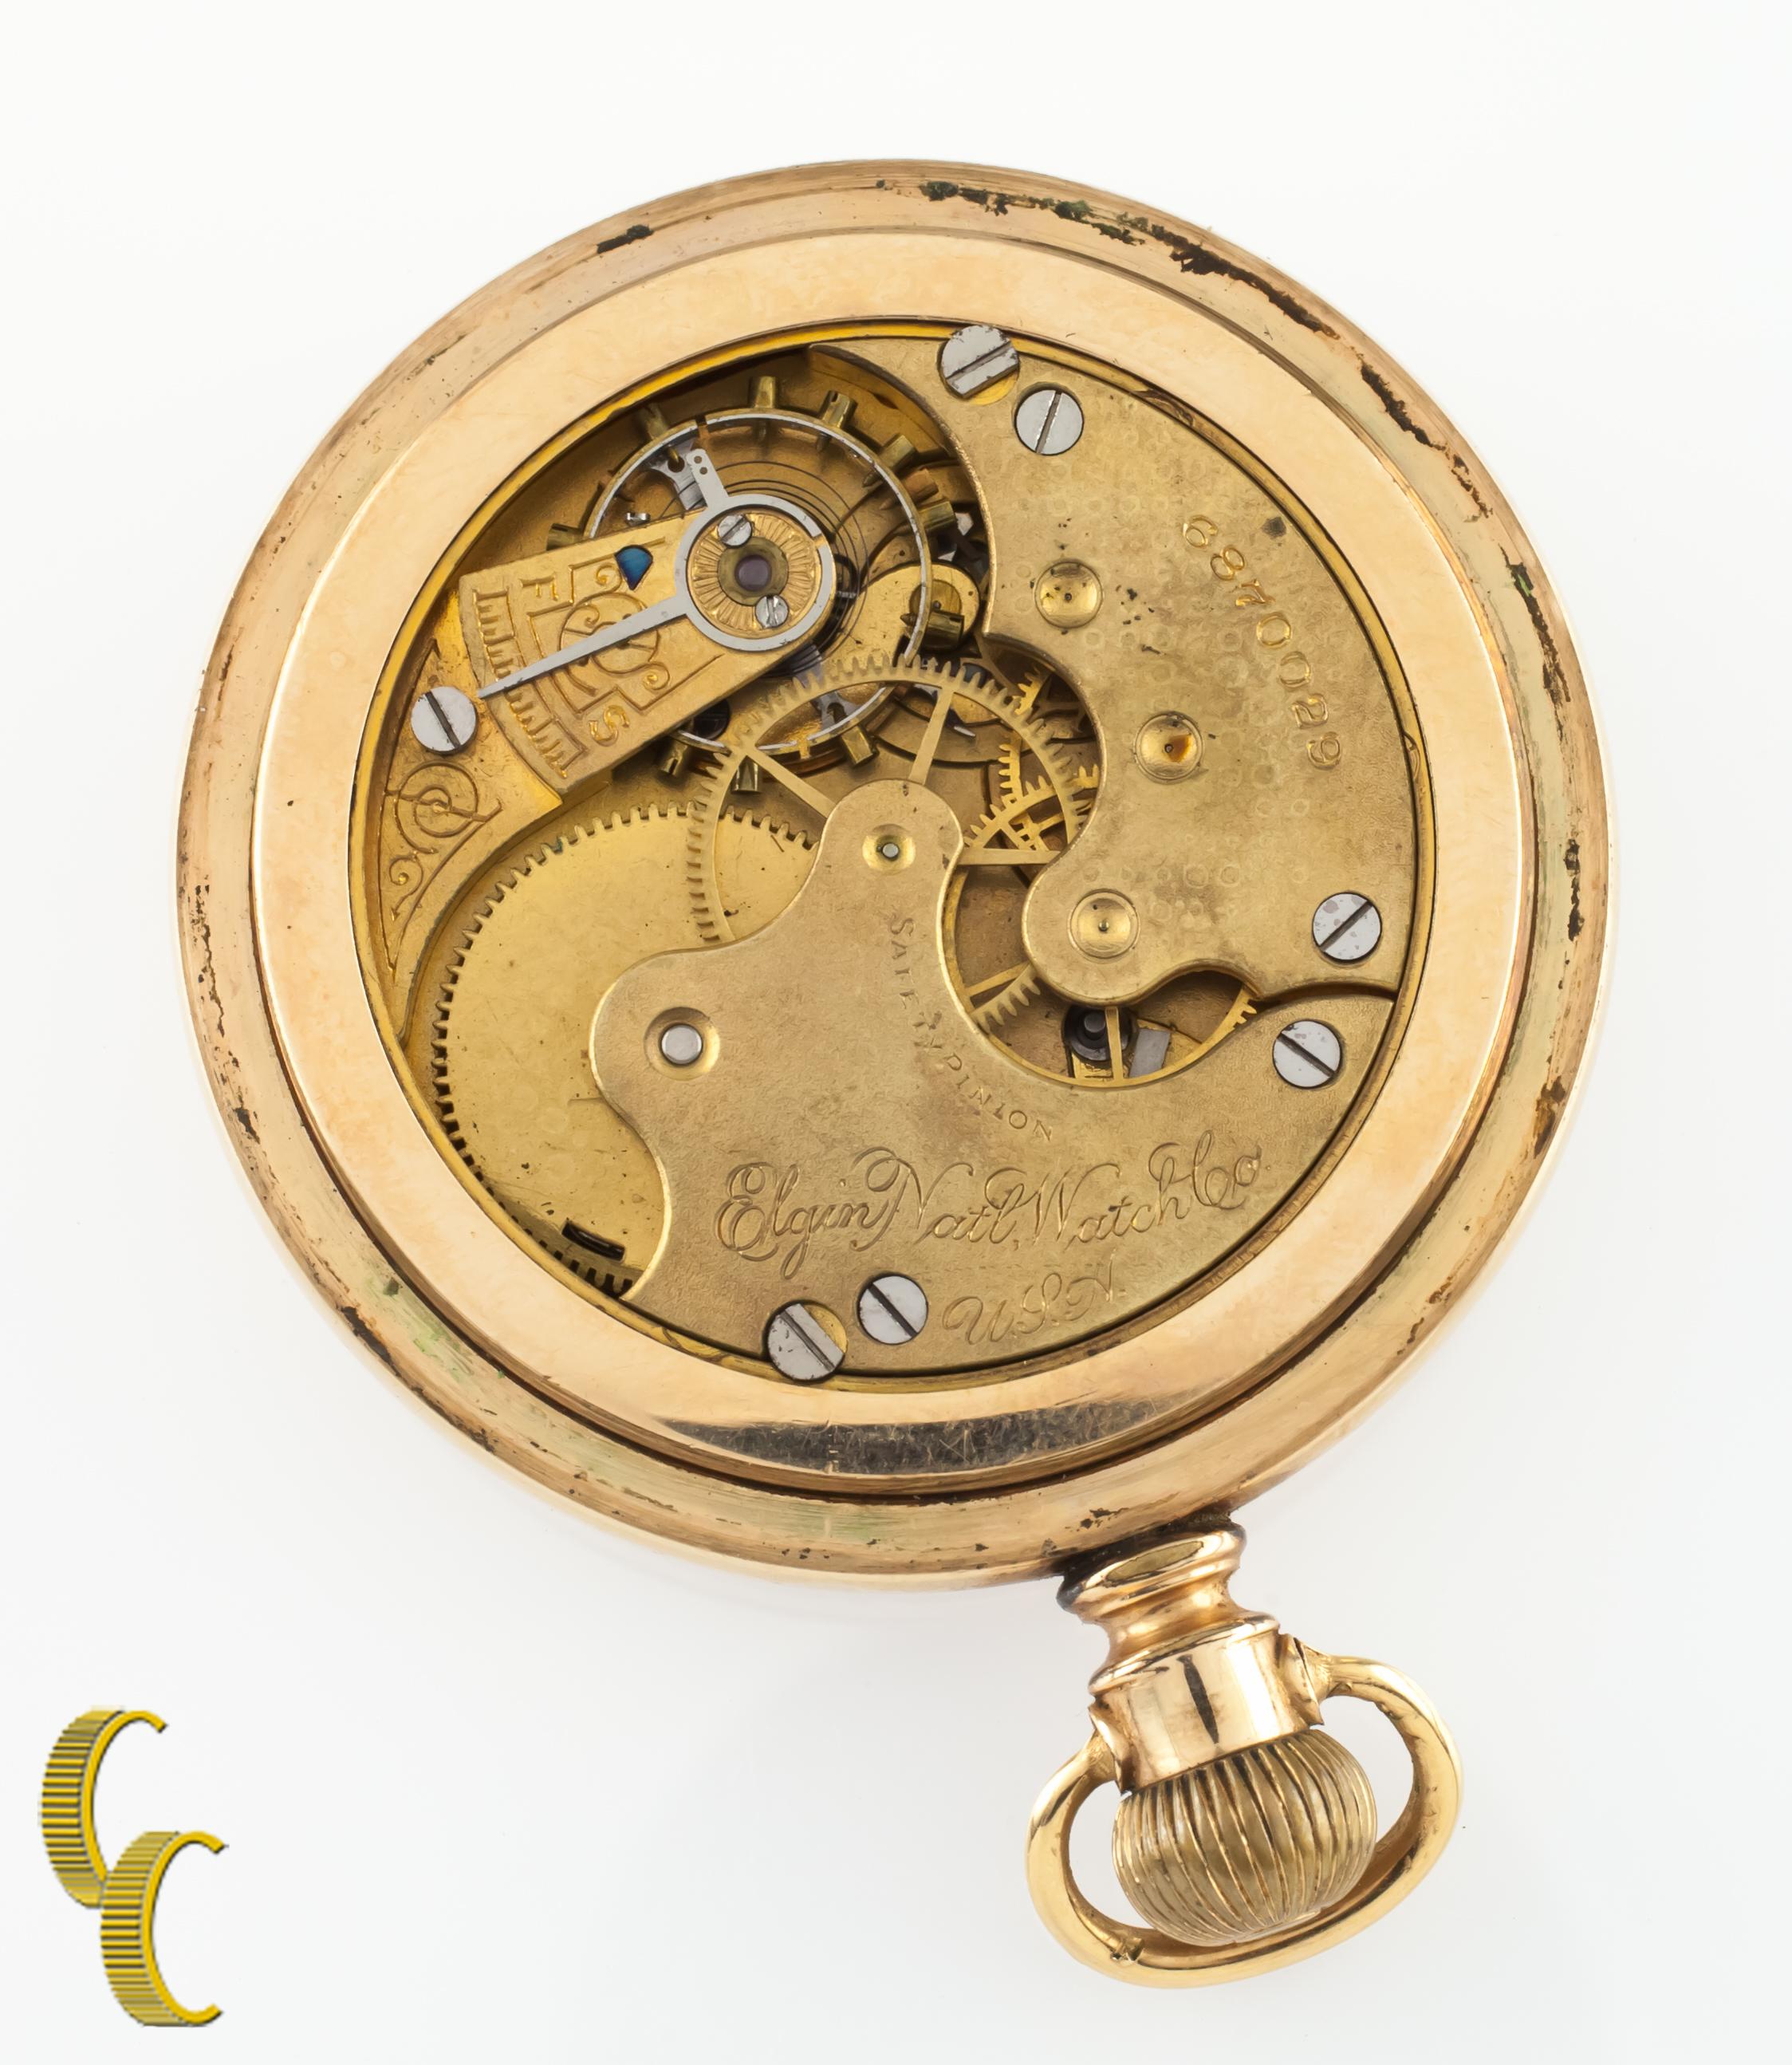 Beautiful Antique Elgin Pocket Watch w/ White Dial Including Blue/Black Hands 
14K Yellow GF Case w/ Intricate Hand-Etched Design on Case
Black Roman Numerals
Case Serial # 4542726
17-Jewel Elgin Movement Serial # 6870029
Grade # 117
Year of